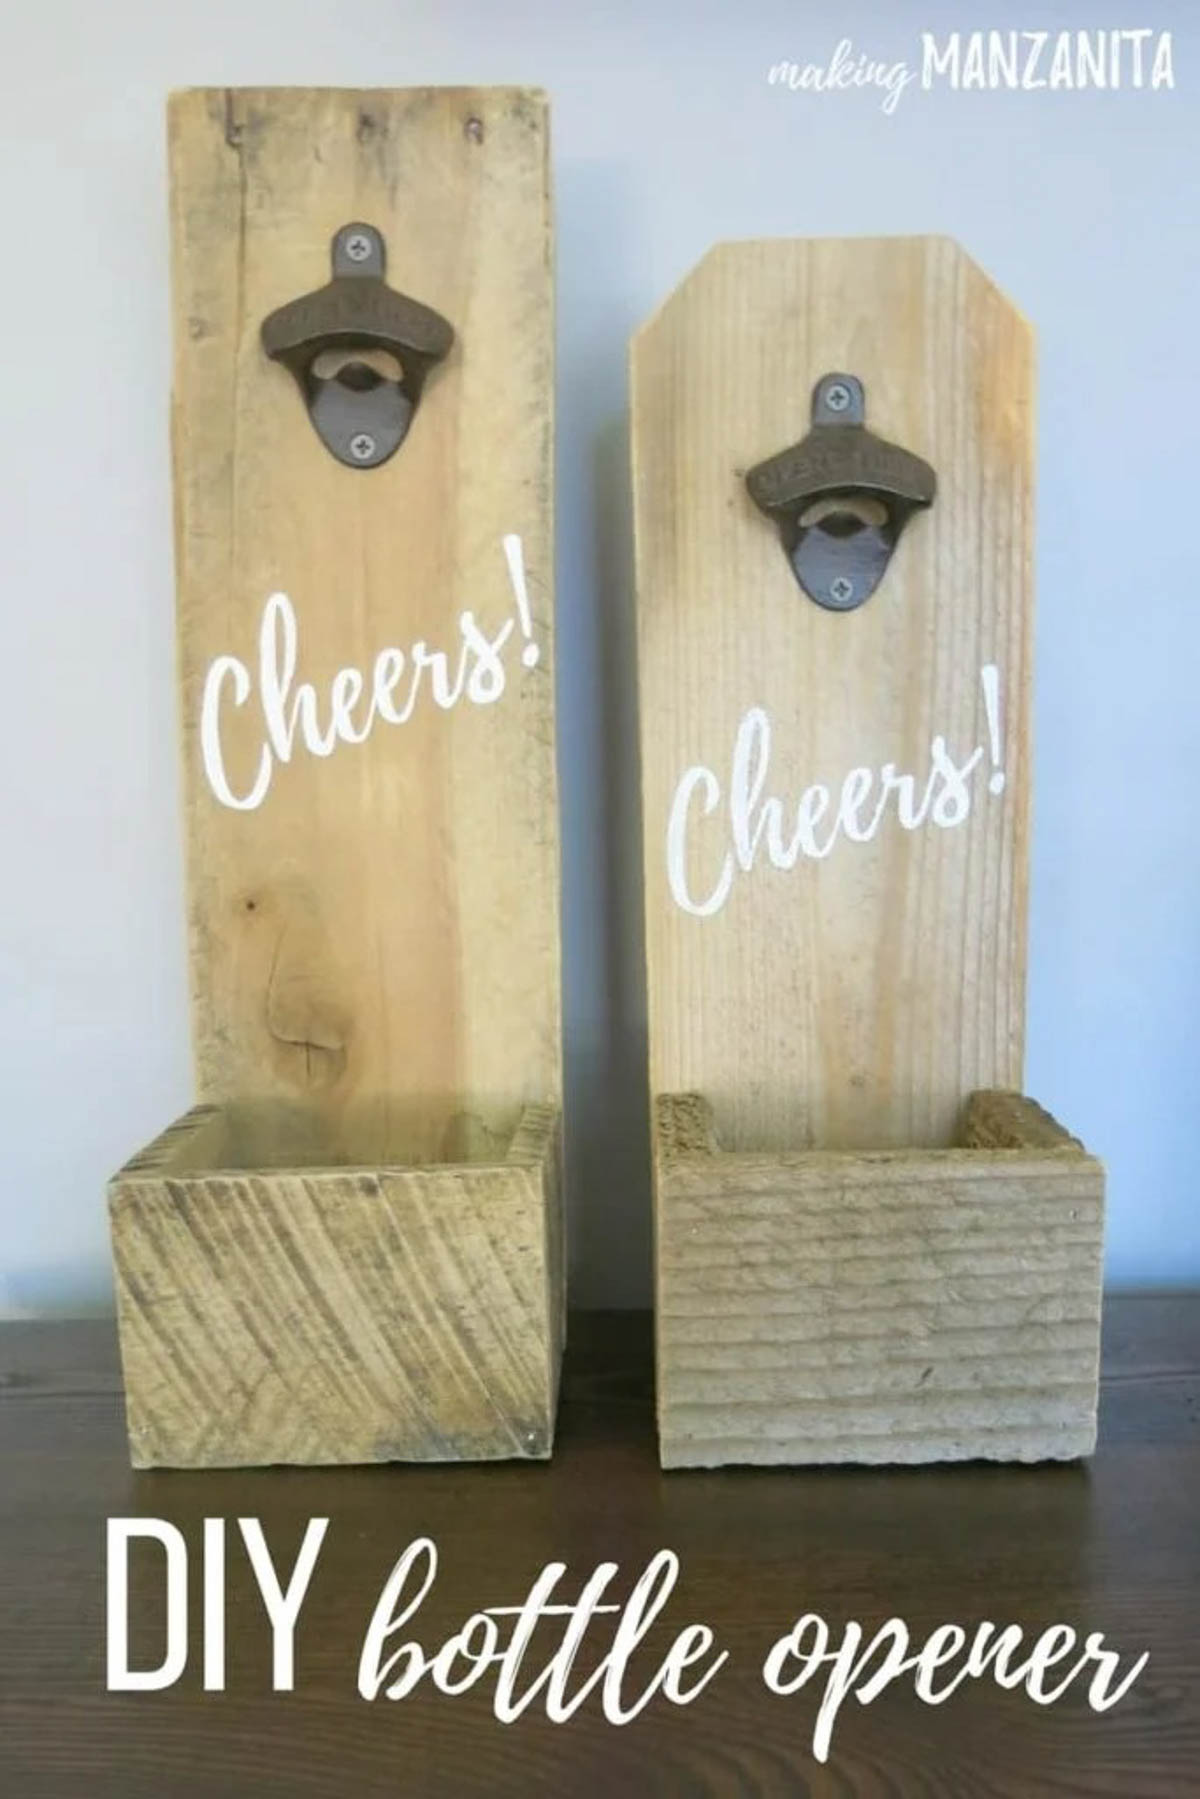 wooden wall mounted bottle openers with "Cheers" stenciled on them